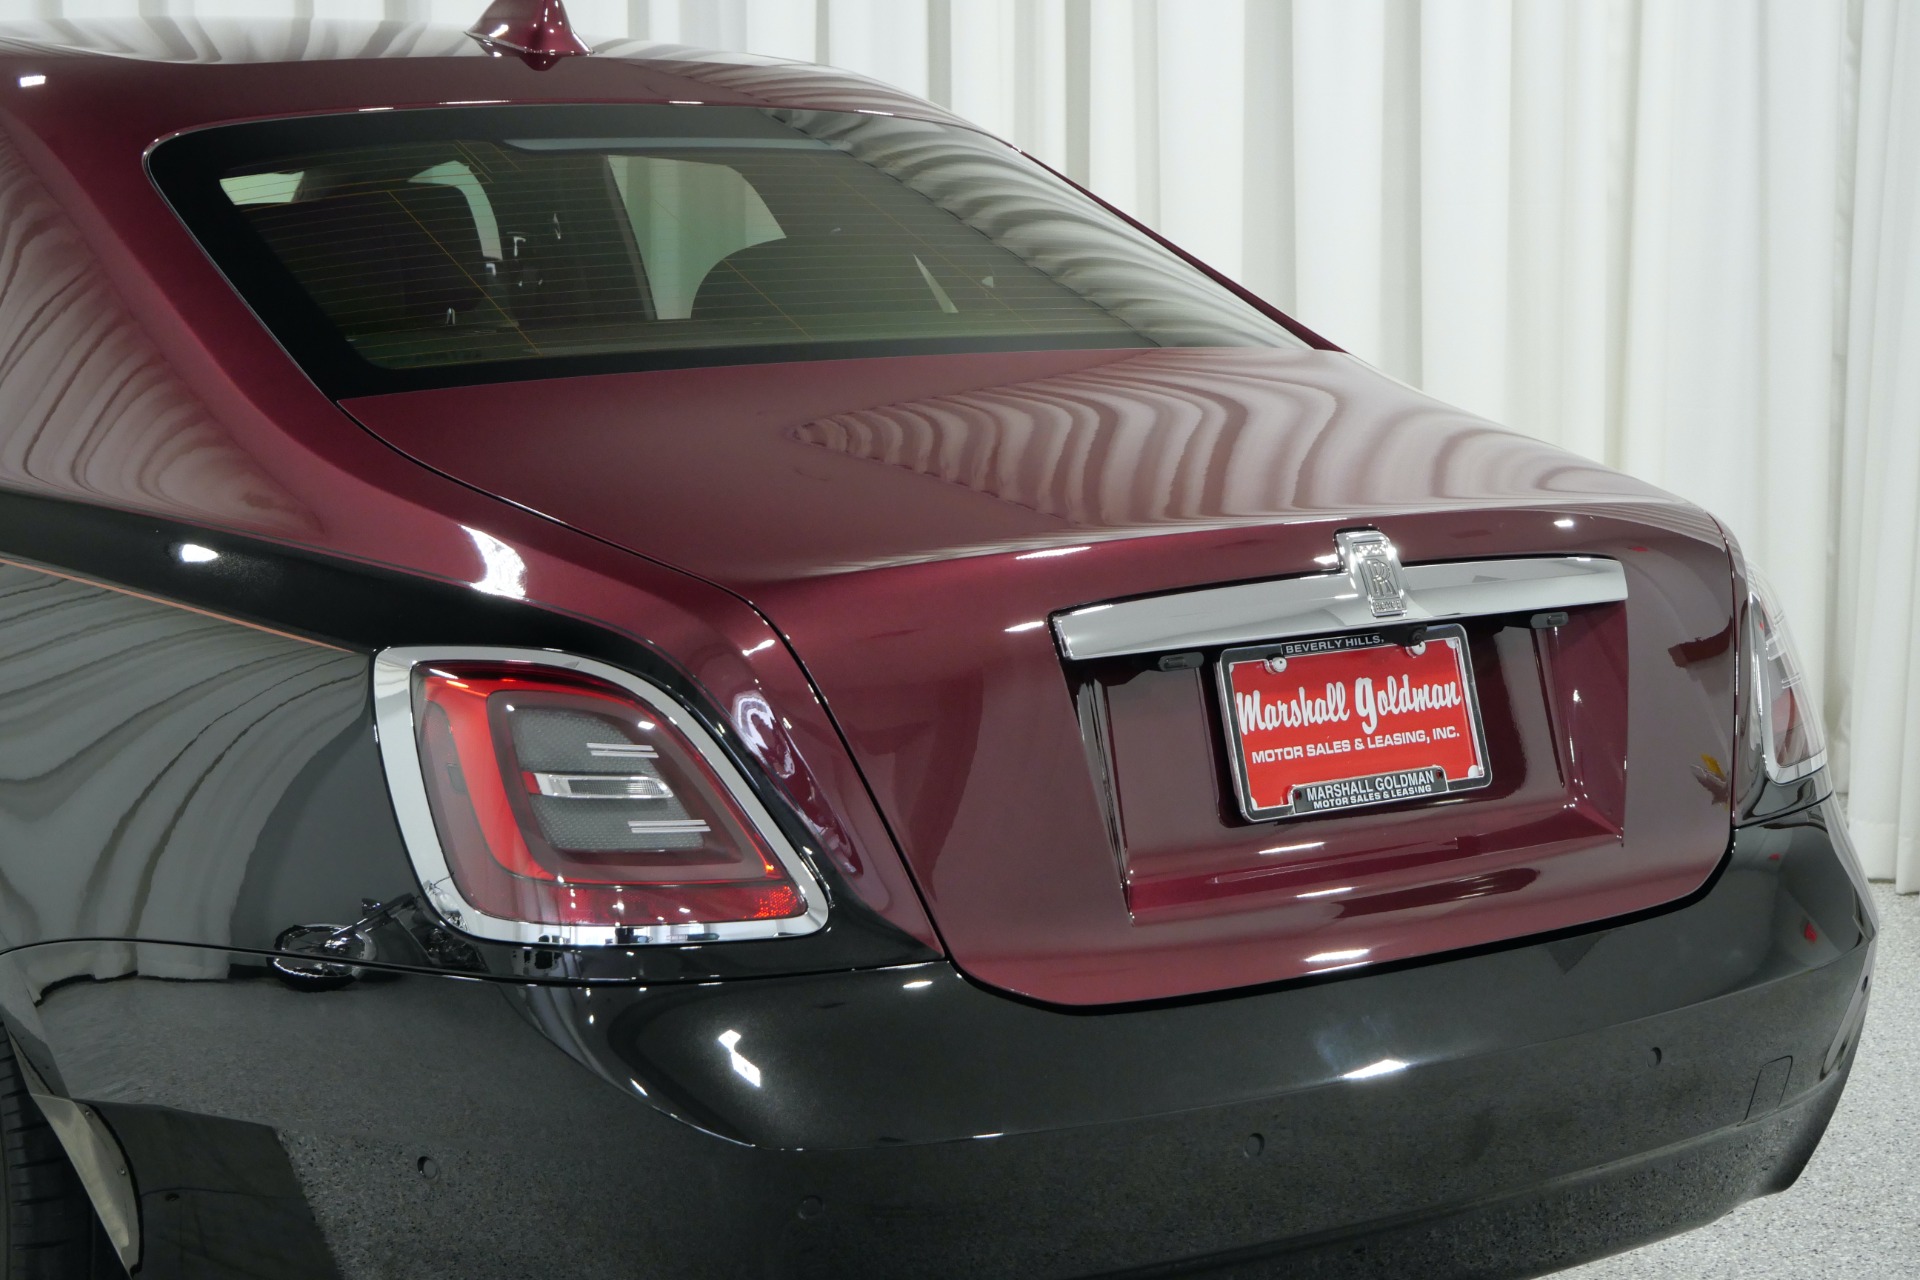 Used 2021 Rolls-Royce Ghost For Sale (Sold)  Marshall Goldman Motor Sales  Stock #B24517